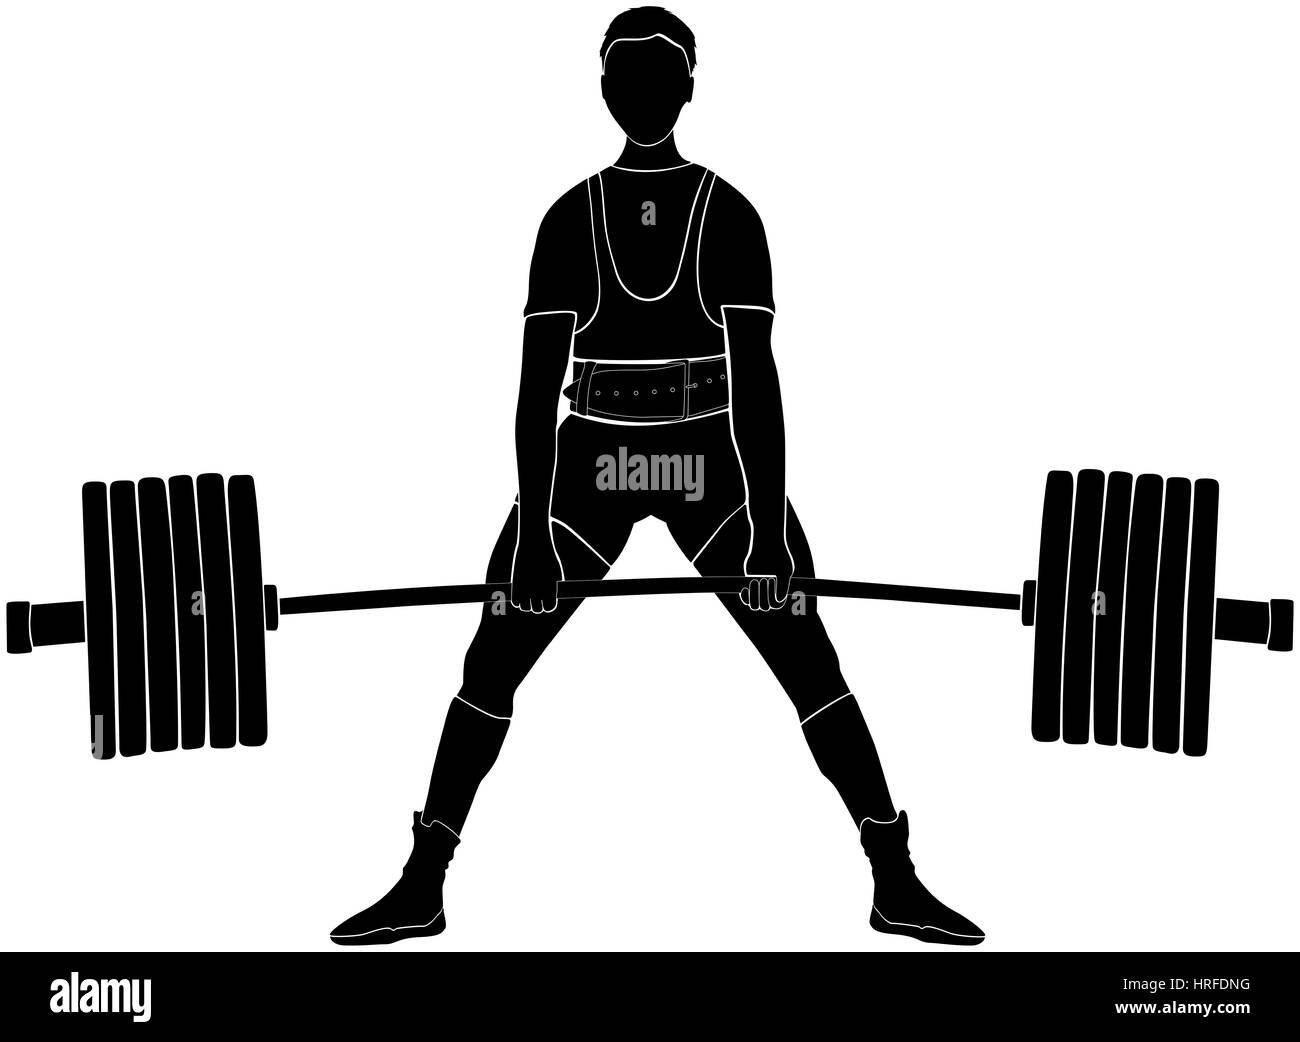 male athlete powerlifter deadlift in powerlifting black silhouette Stock Photo